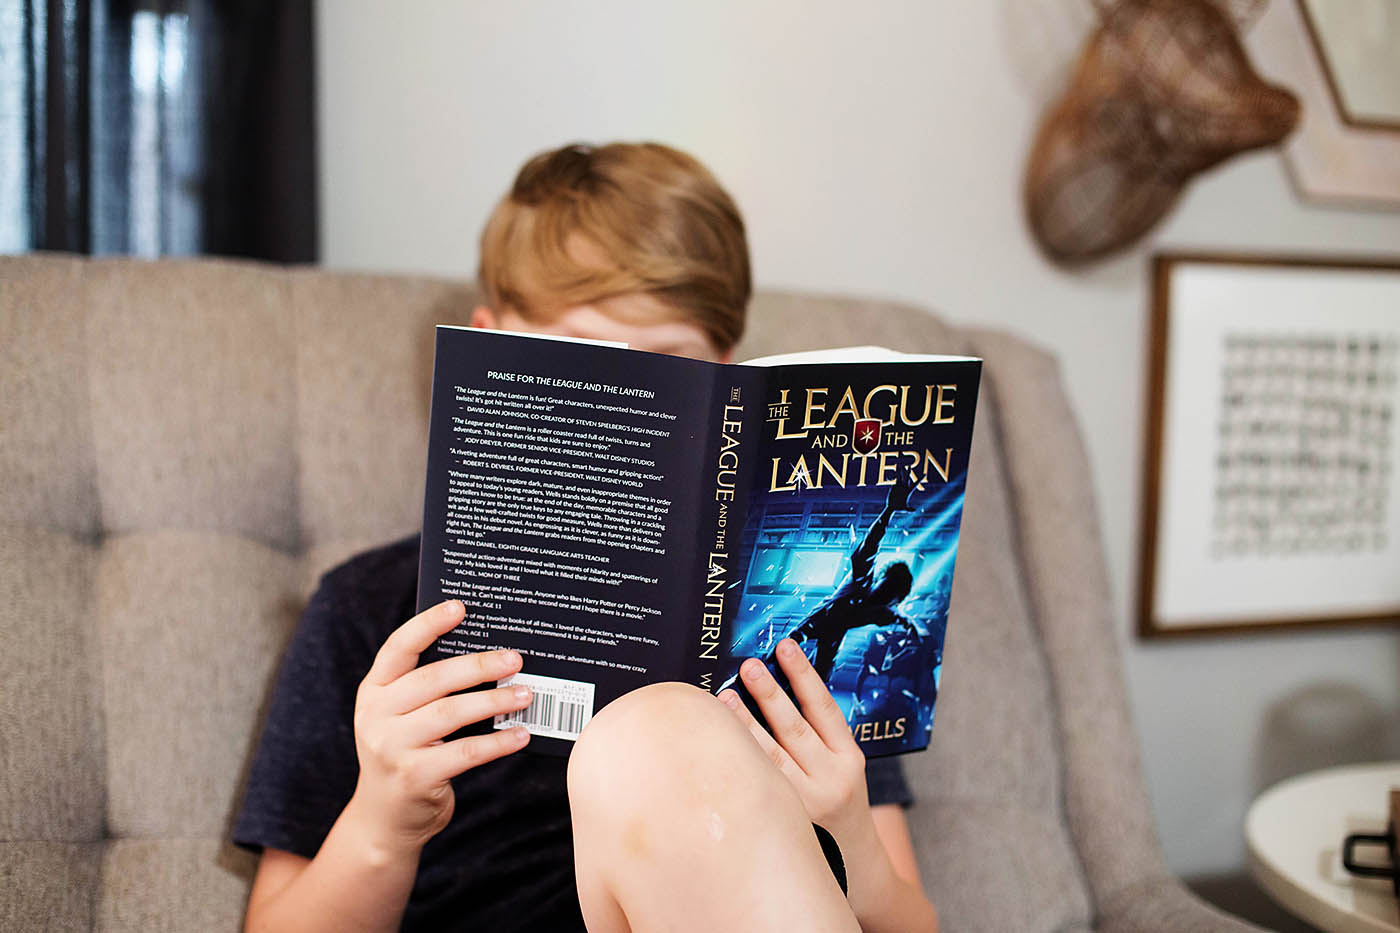 The League and the Lantern - an awesome new book series perfect for kids ages 9-13